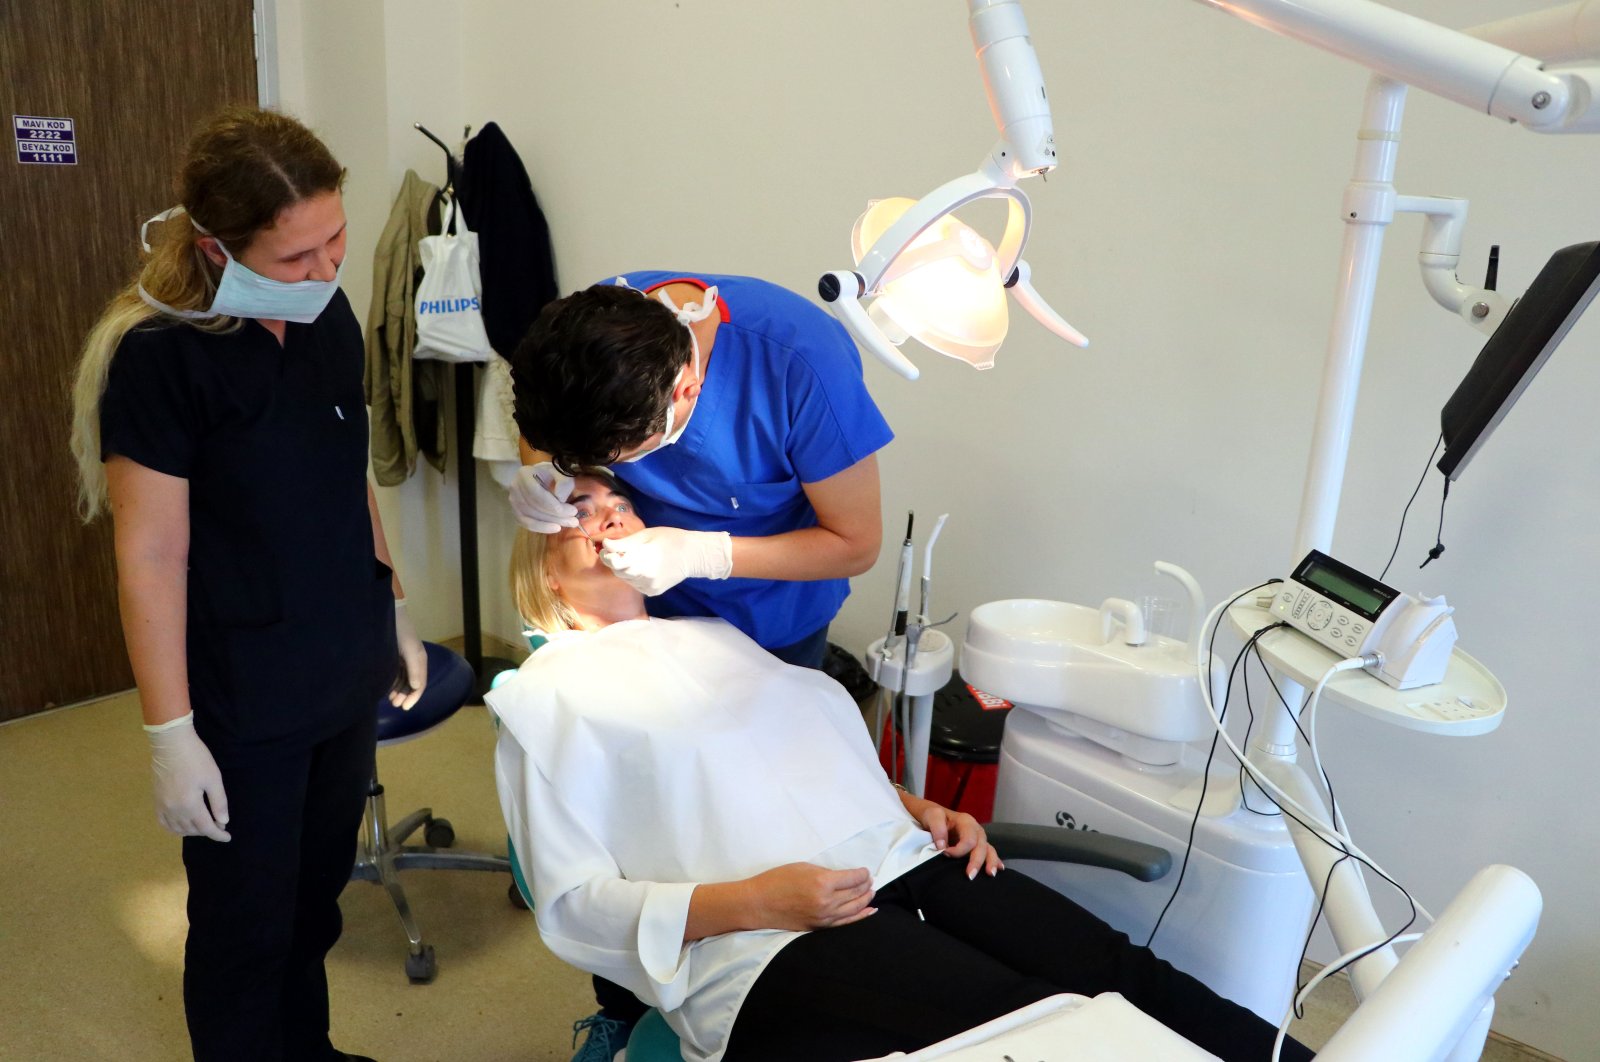 A public dental hospital in Tekirdağ, a city near Turkey's borders with Bulgaria and Greece, has evolved into a popular destination for patients from the Balkan countries since it opened four years ago. (AA Photo)